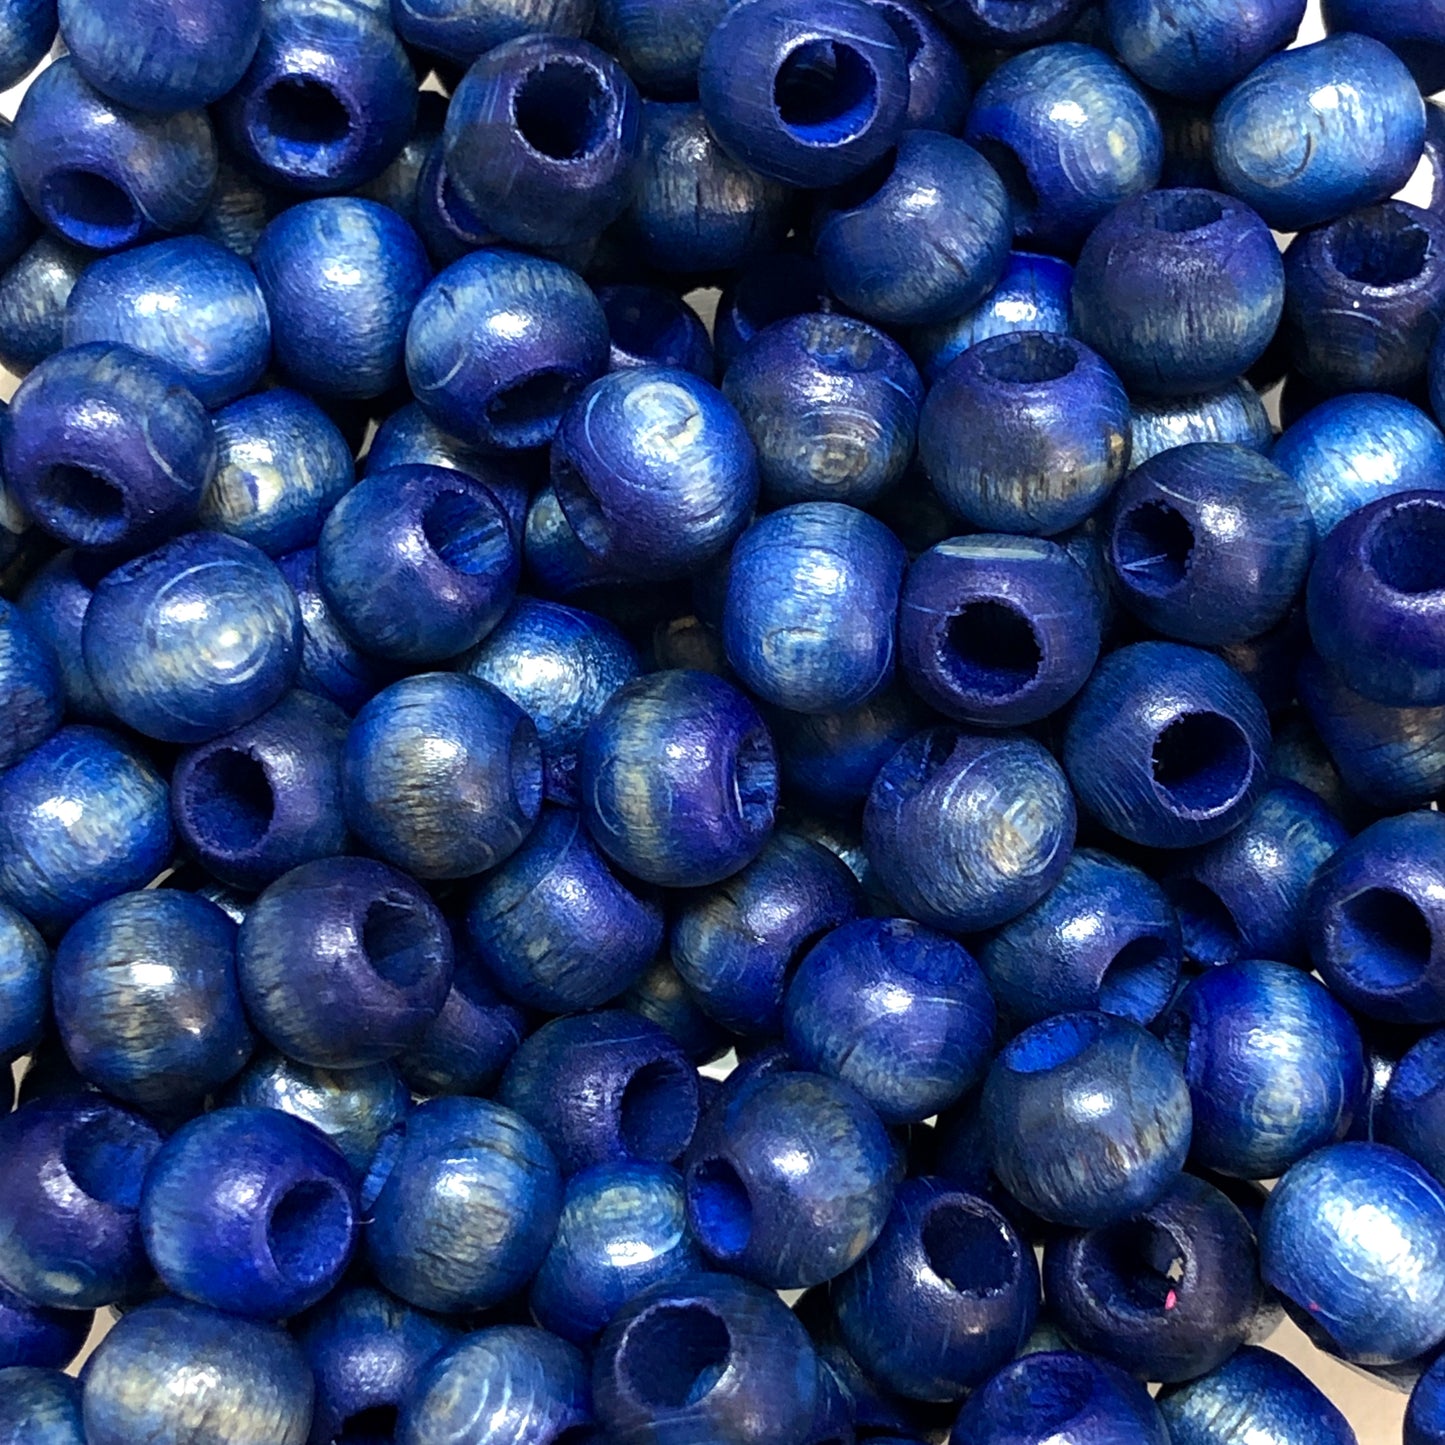 8mm Wide Hole Wooden Bead - 13 - Navy Blue